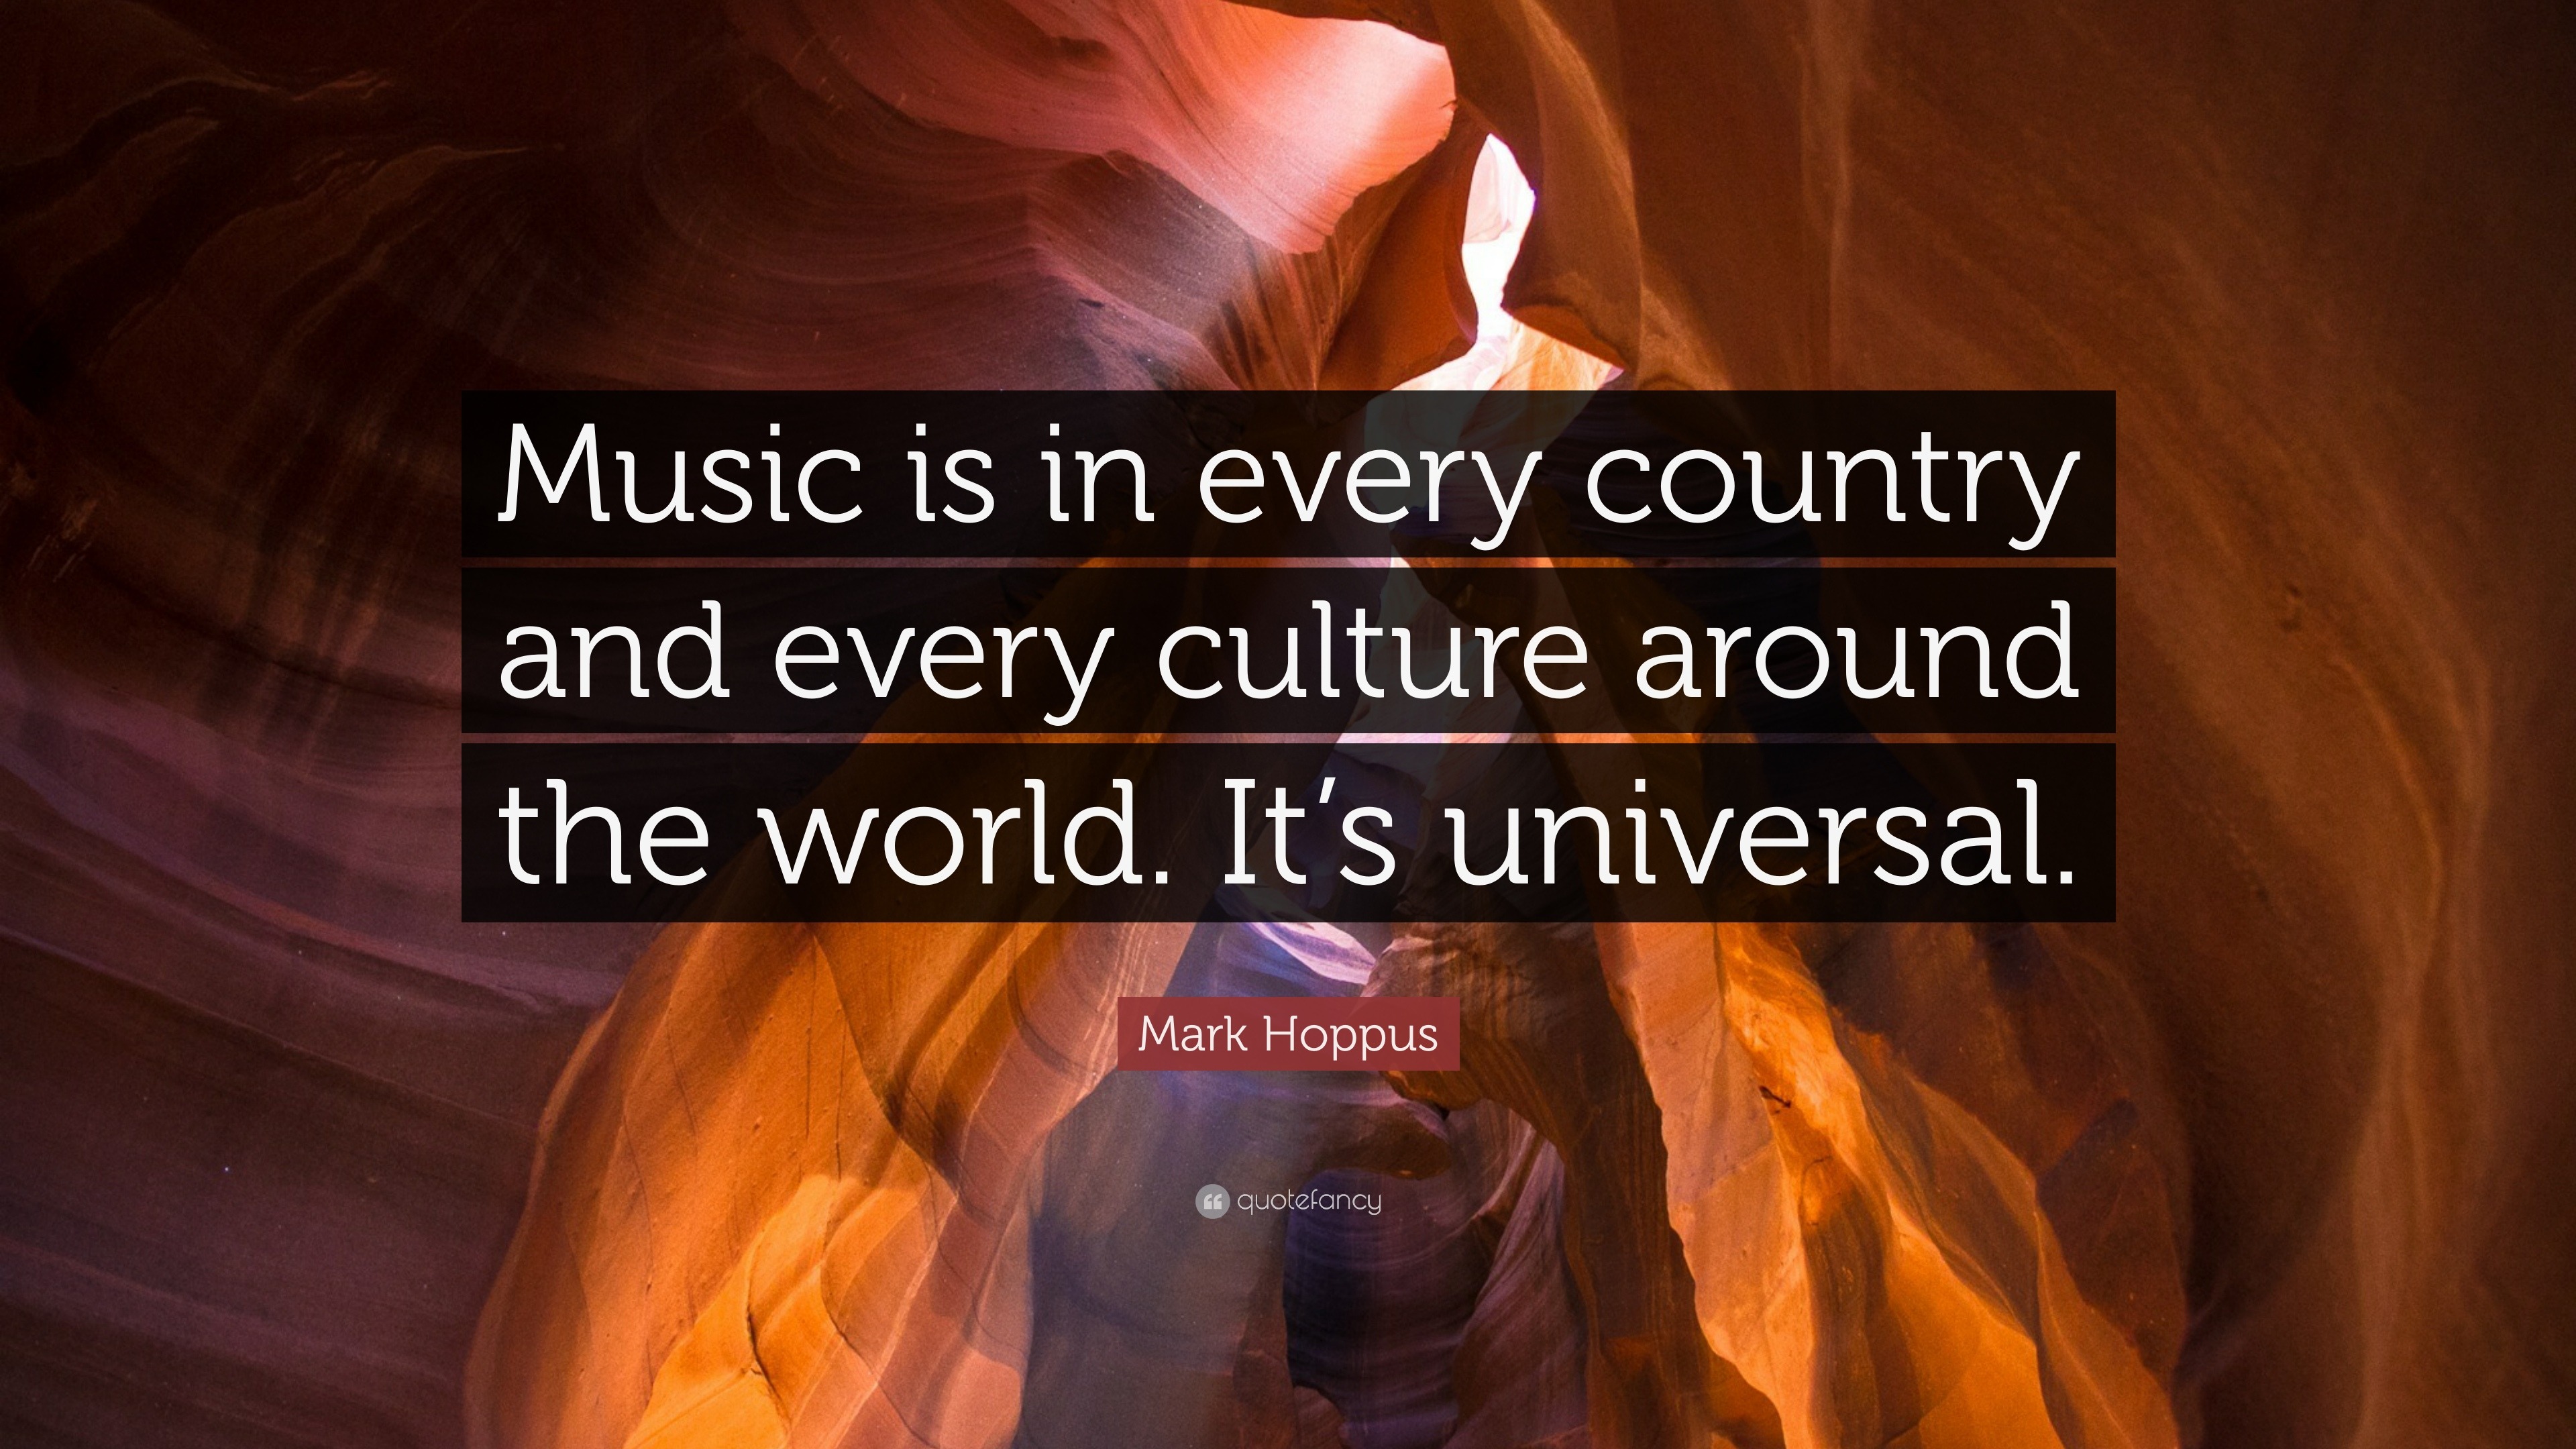 Mark Hoppus Quote: "Music is in every country and every ...